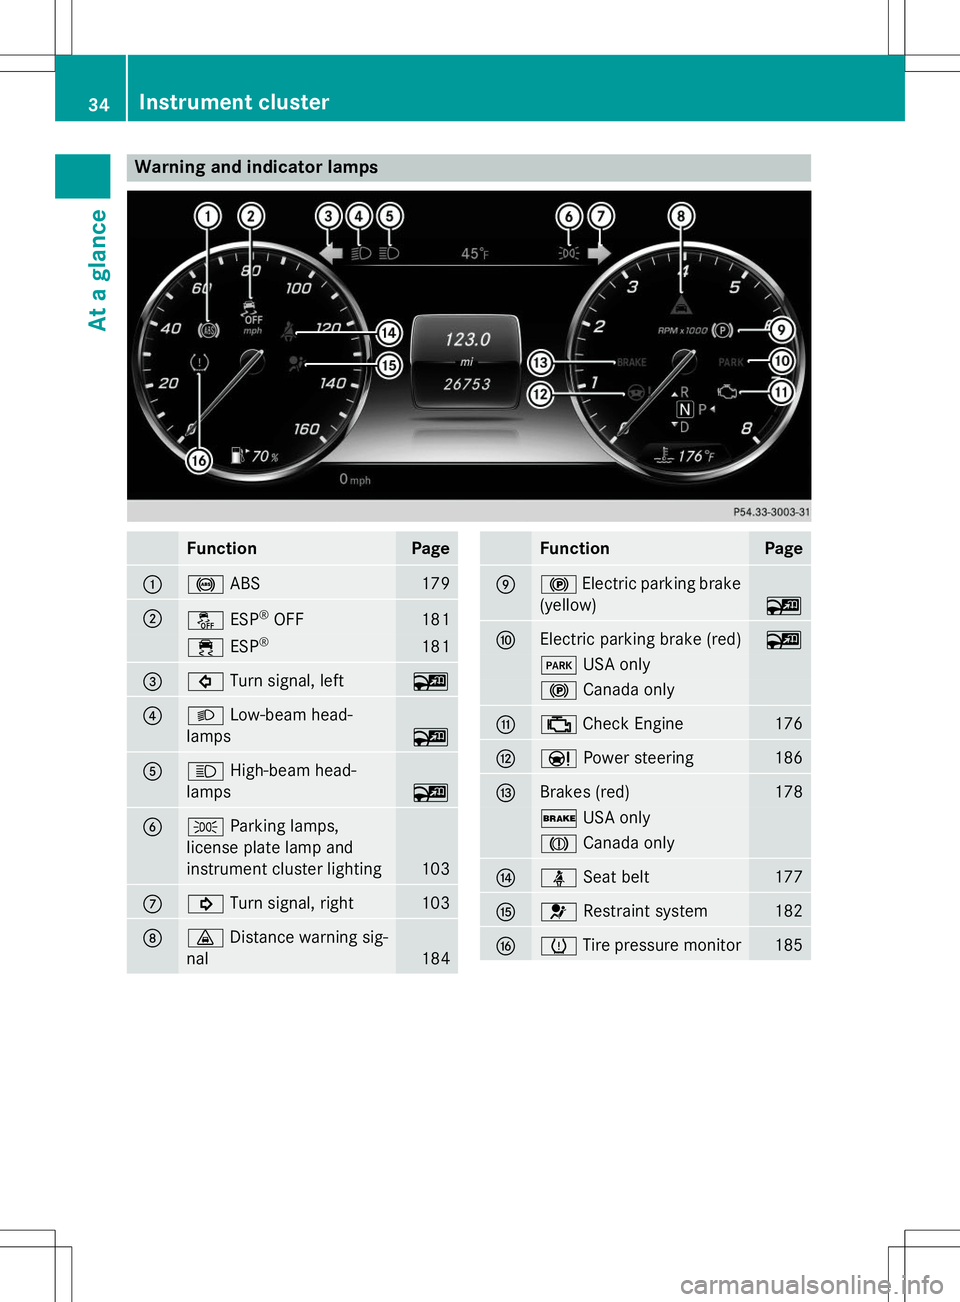 MERCEDES-BENZ S-COUPE 2015  Owners Manual Warning and indicator lamps
FunctionPage
:!ABS179
;åESP®
OFF181
÷ ESP®181
=#
Turn signal, left~
?LLow-beam head-
lamps
~
AK High-beam head-
lamps
~
BT Parking lamps,
license plate lamp and 
instru